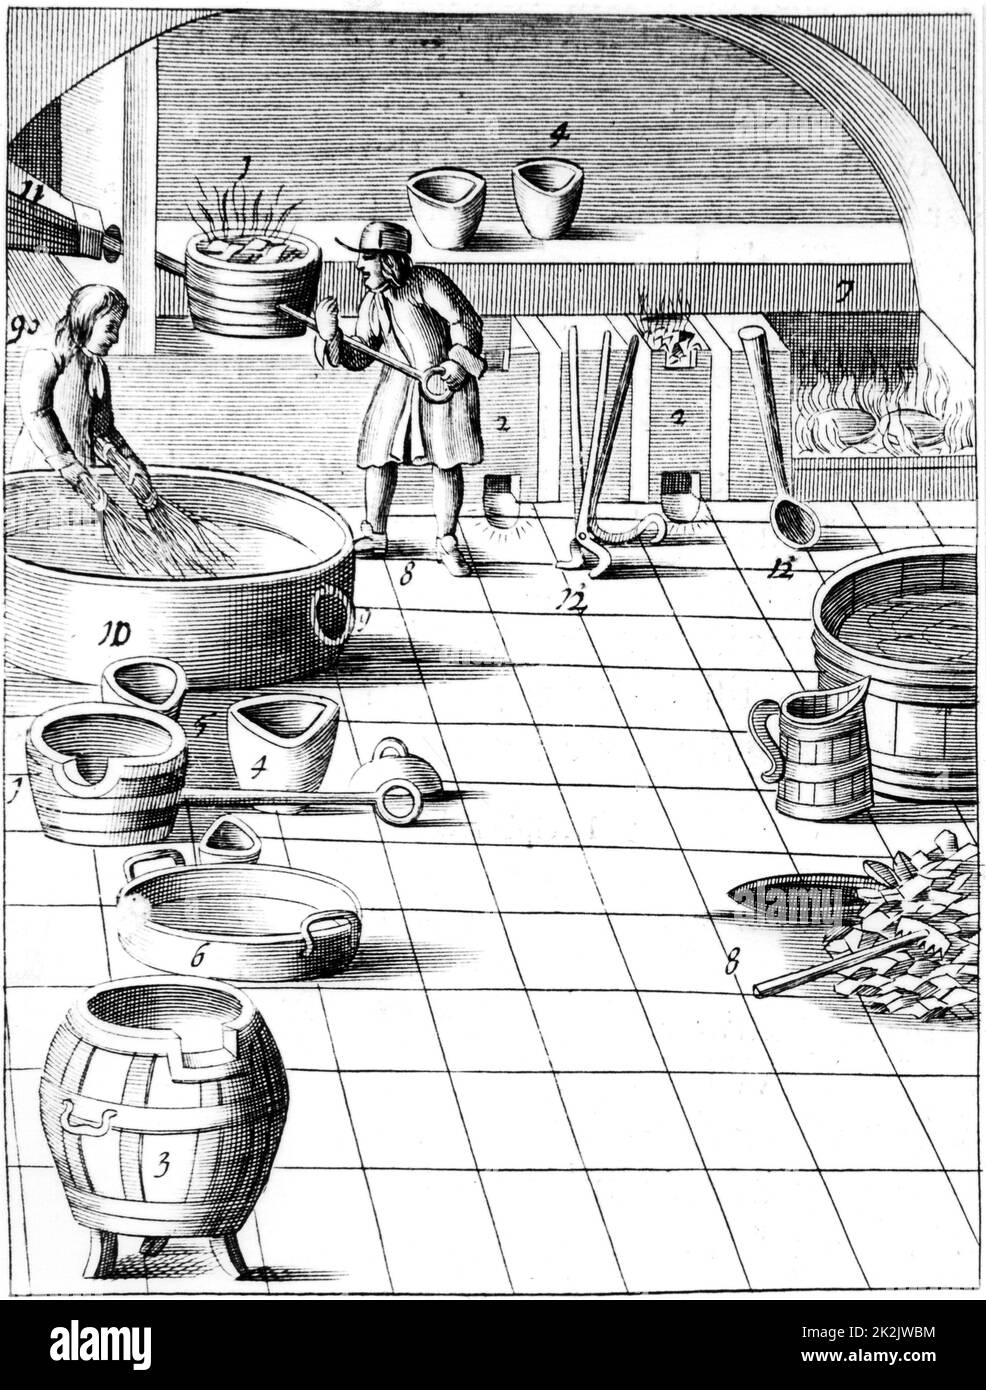 Preparation of copper and silver to be alloyed for production of coins. Copper melted (1) while apprentice (9) soaks birch twigs in water. When copper poured on twigs it forms grains. It is then ready to be alloyed with silver being heated at (7). From 1683 English edition of Beschreibung allerfurnemisten mineralischen Ertzt by Lazarus Ercker, first published in 1580. Stock Photo